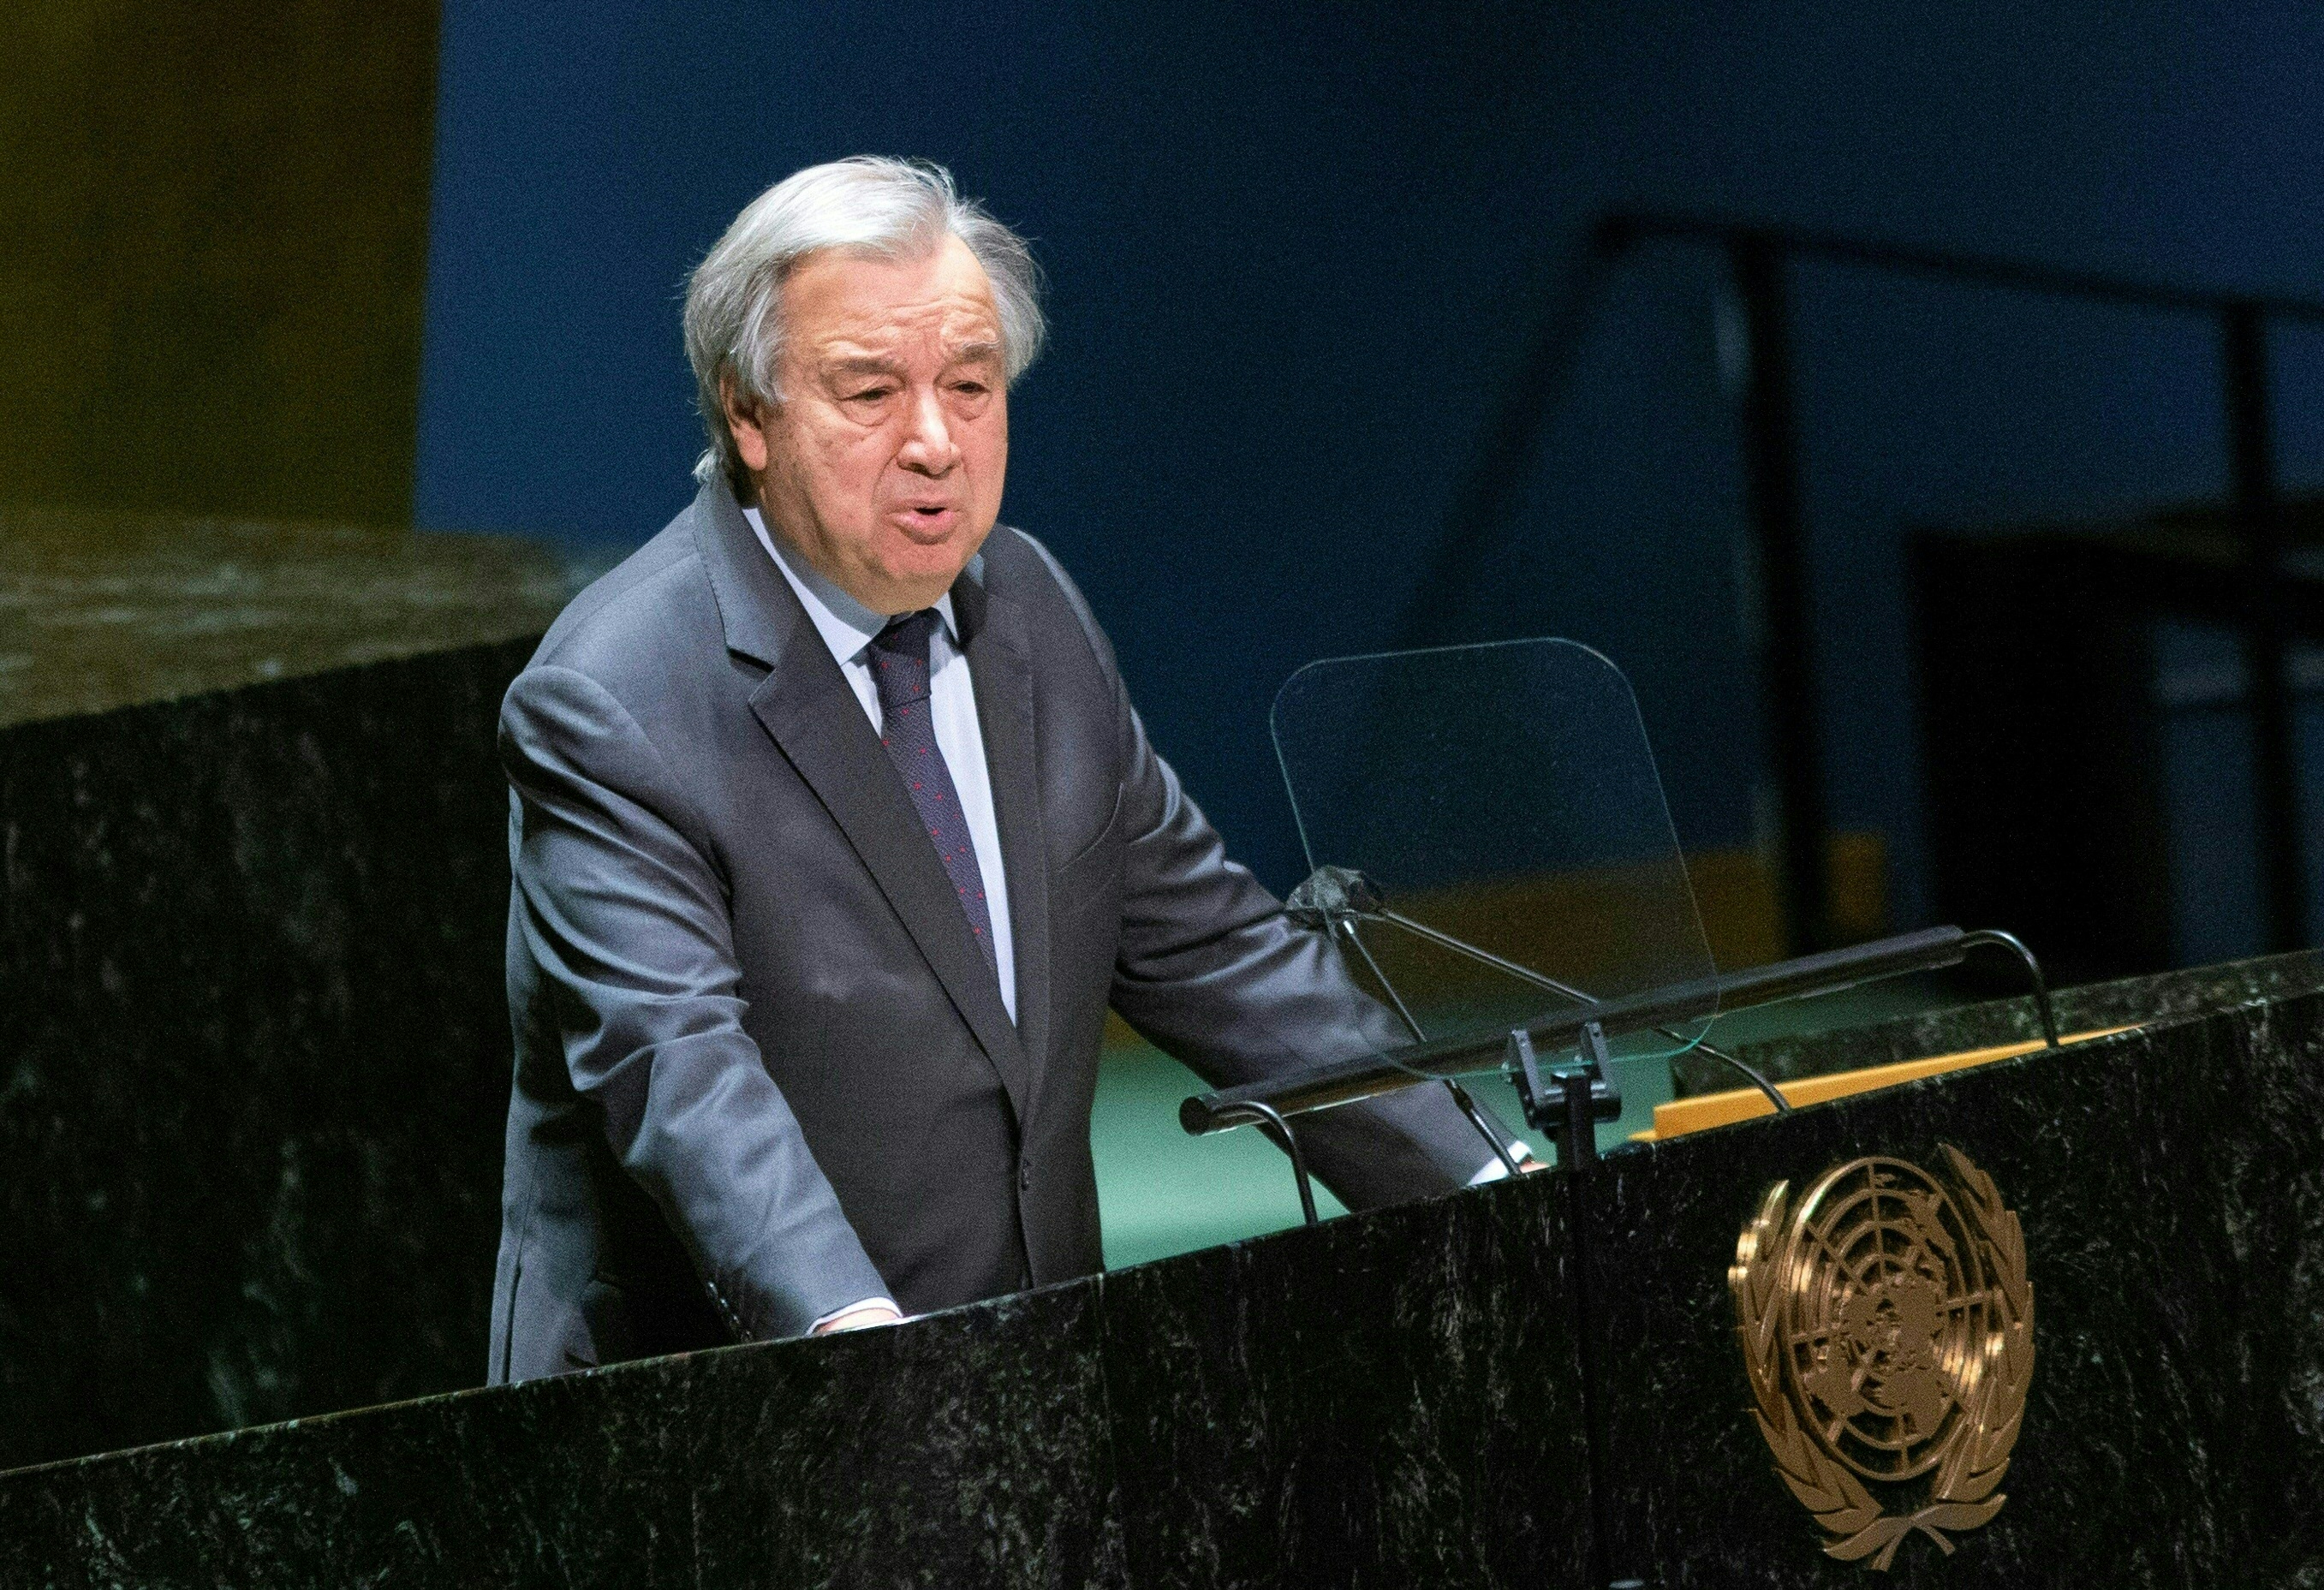 UN Secretary-General Antonio Guterres speaks on the Russia-Ukraine conflict at the General Assembly emergency special session in New York on February 28.